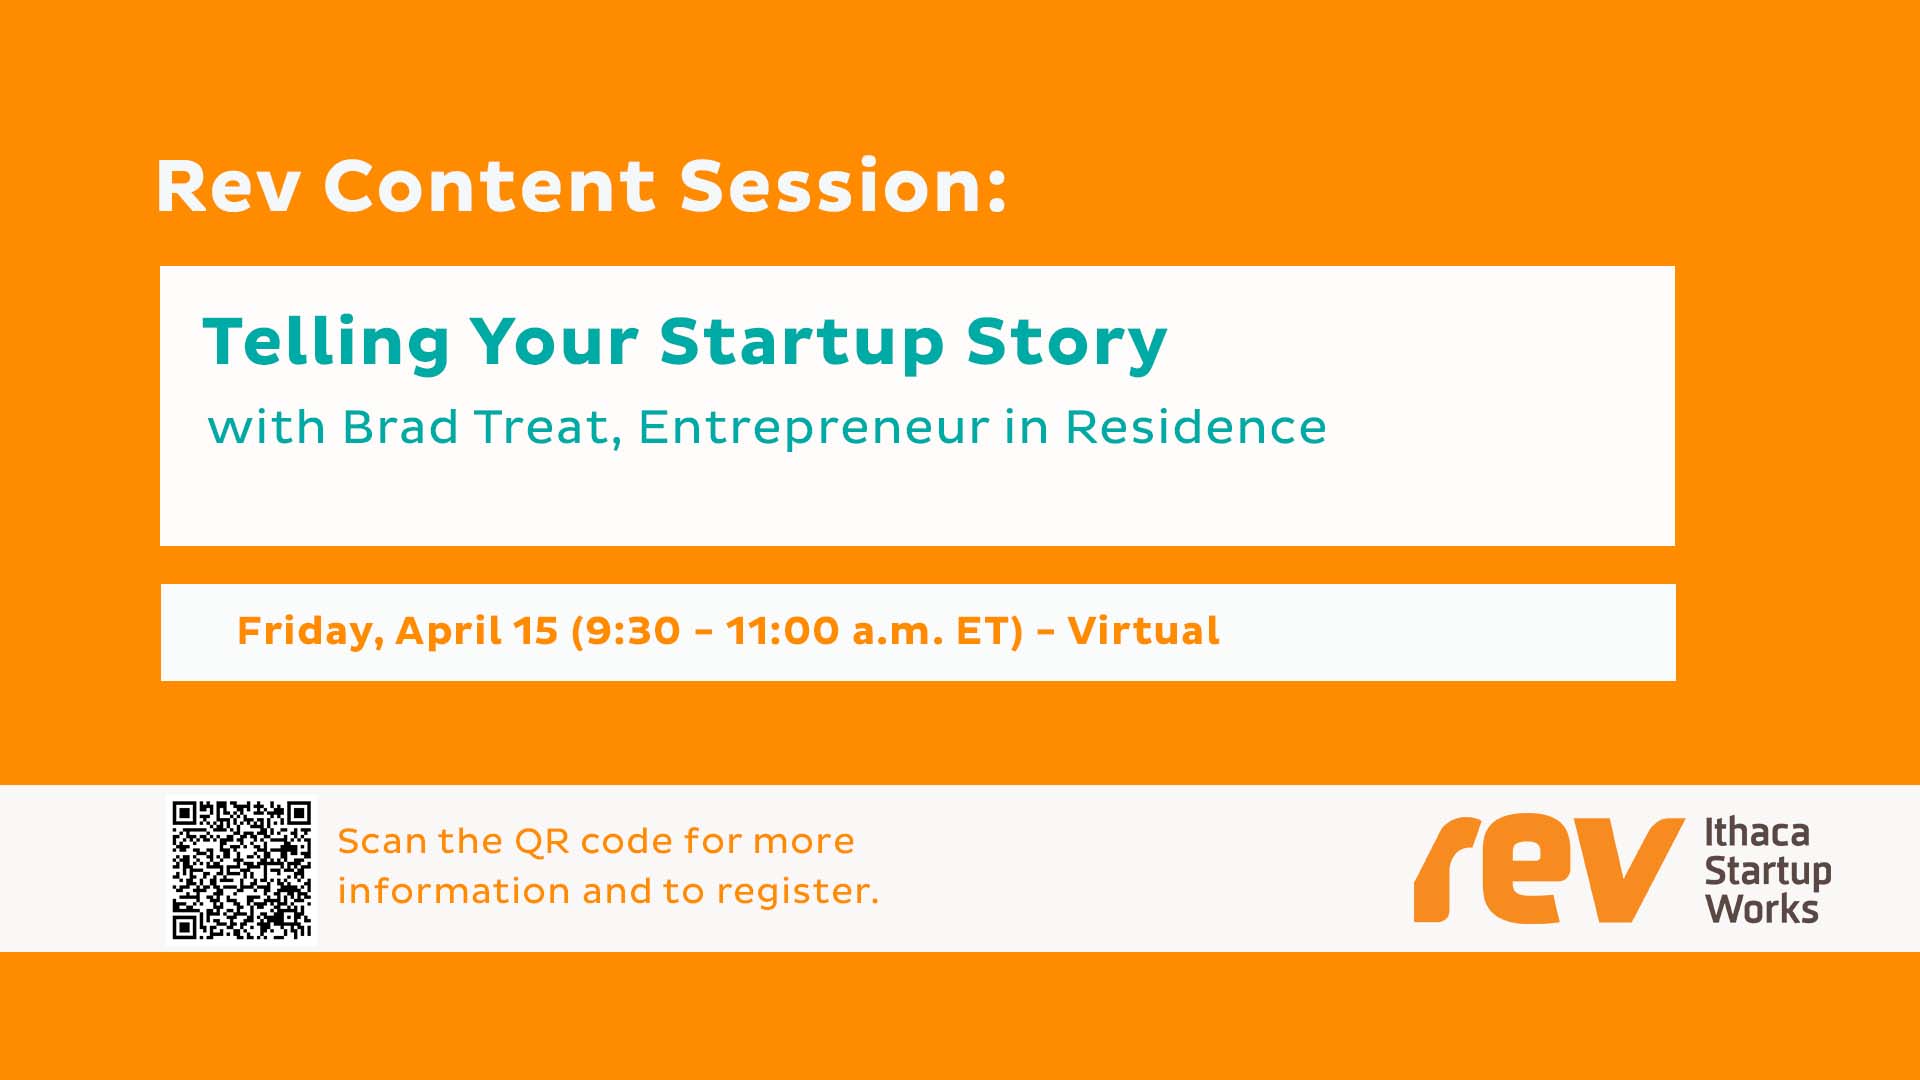 Rev: Ithaca Startup Works. Rev Content Session: Telling Your Startup Story with Brad Treat, Entrepreneur in Residence. Friday, April 15 (9:30 - 11:00 am ET) - Virtual.